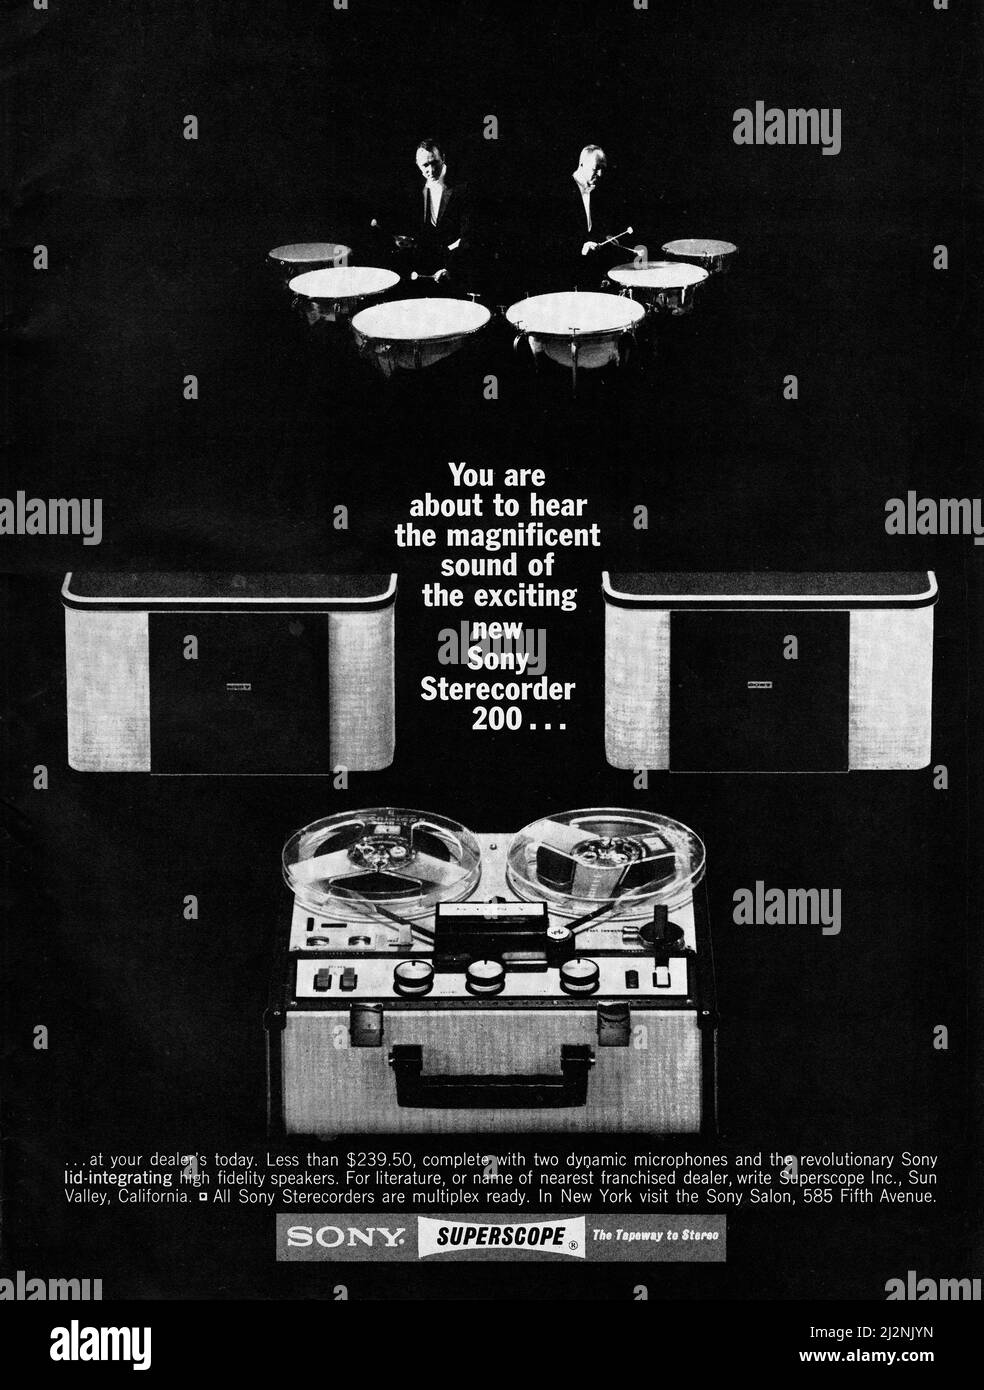 An ad for Sony Stereo Recorder 200, a reel to reel tape recorder